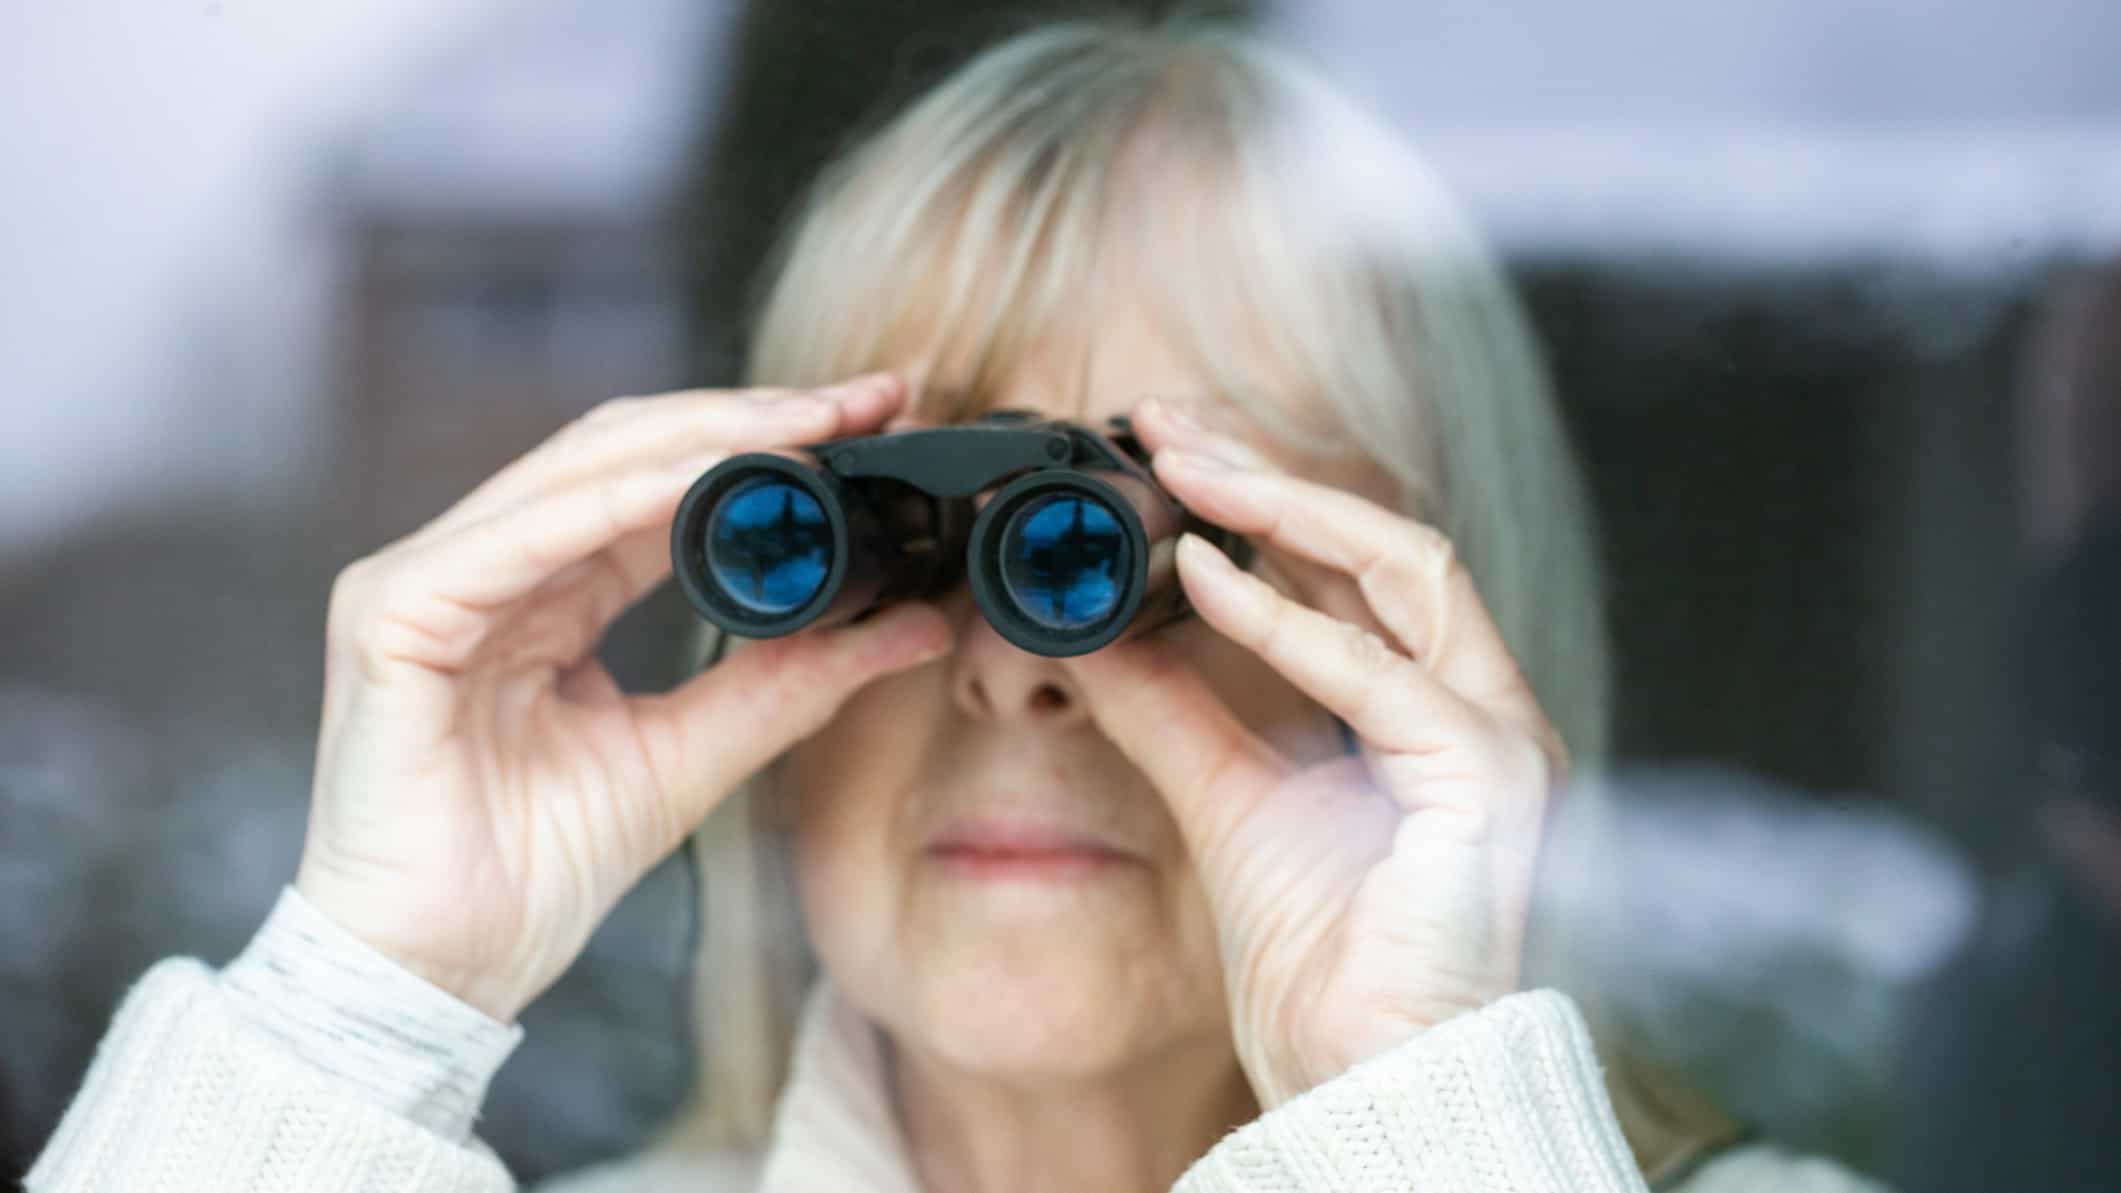 asx share price on watch represented by lady looking through pair of binoculars